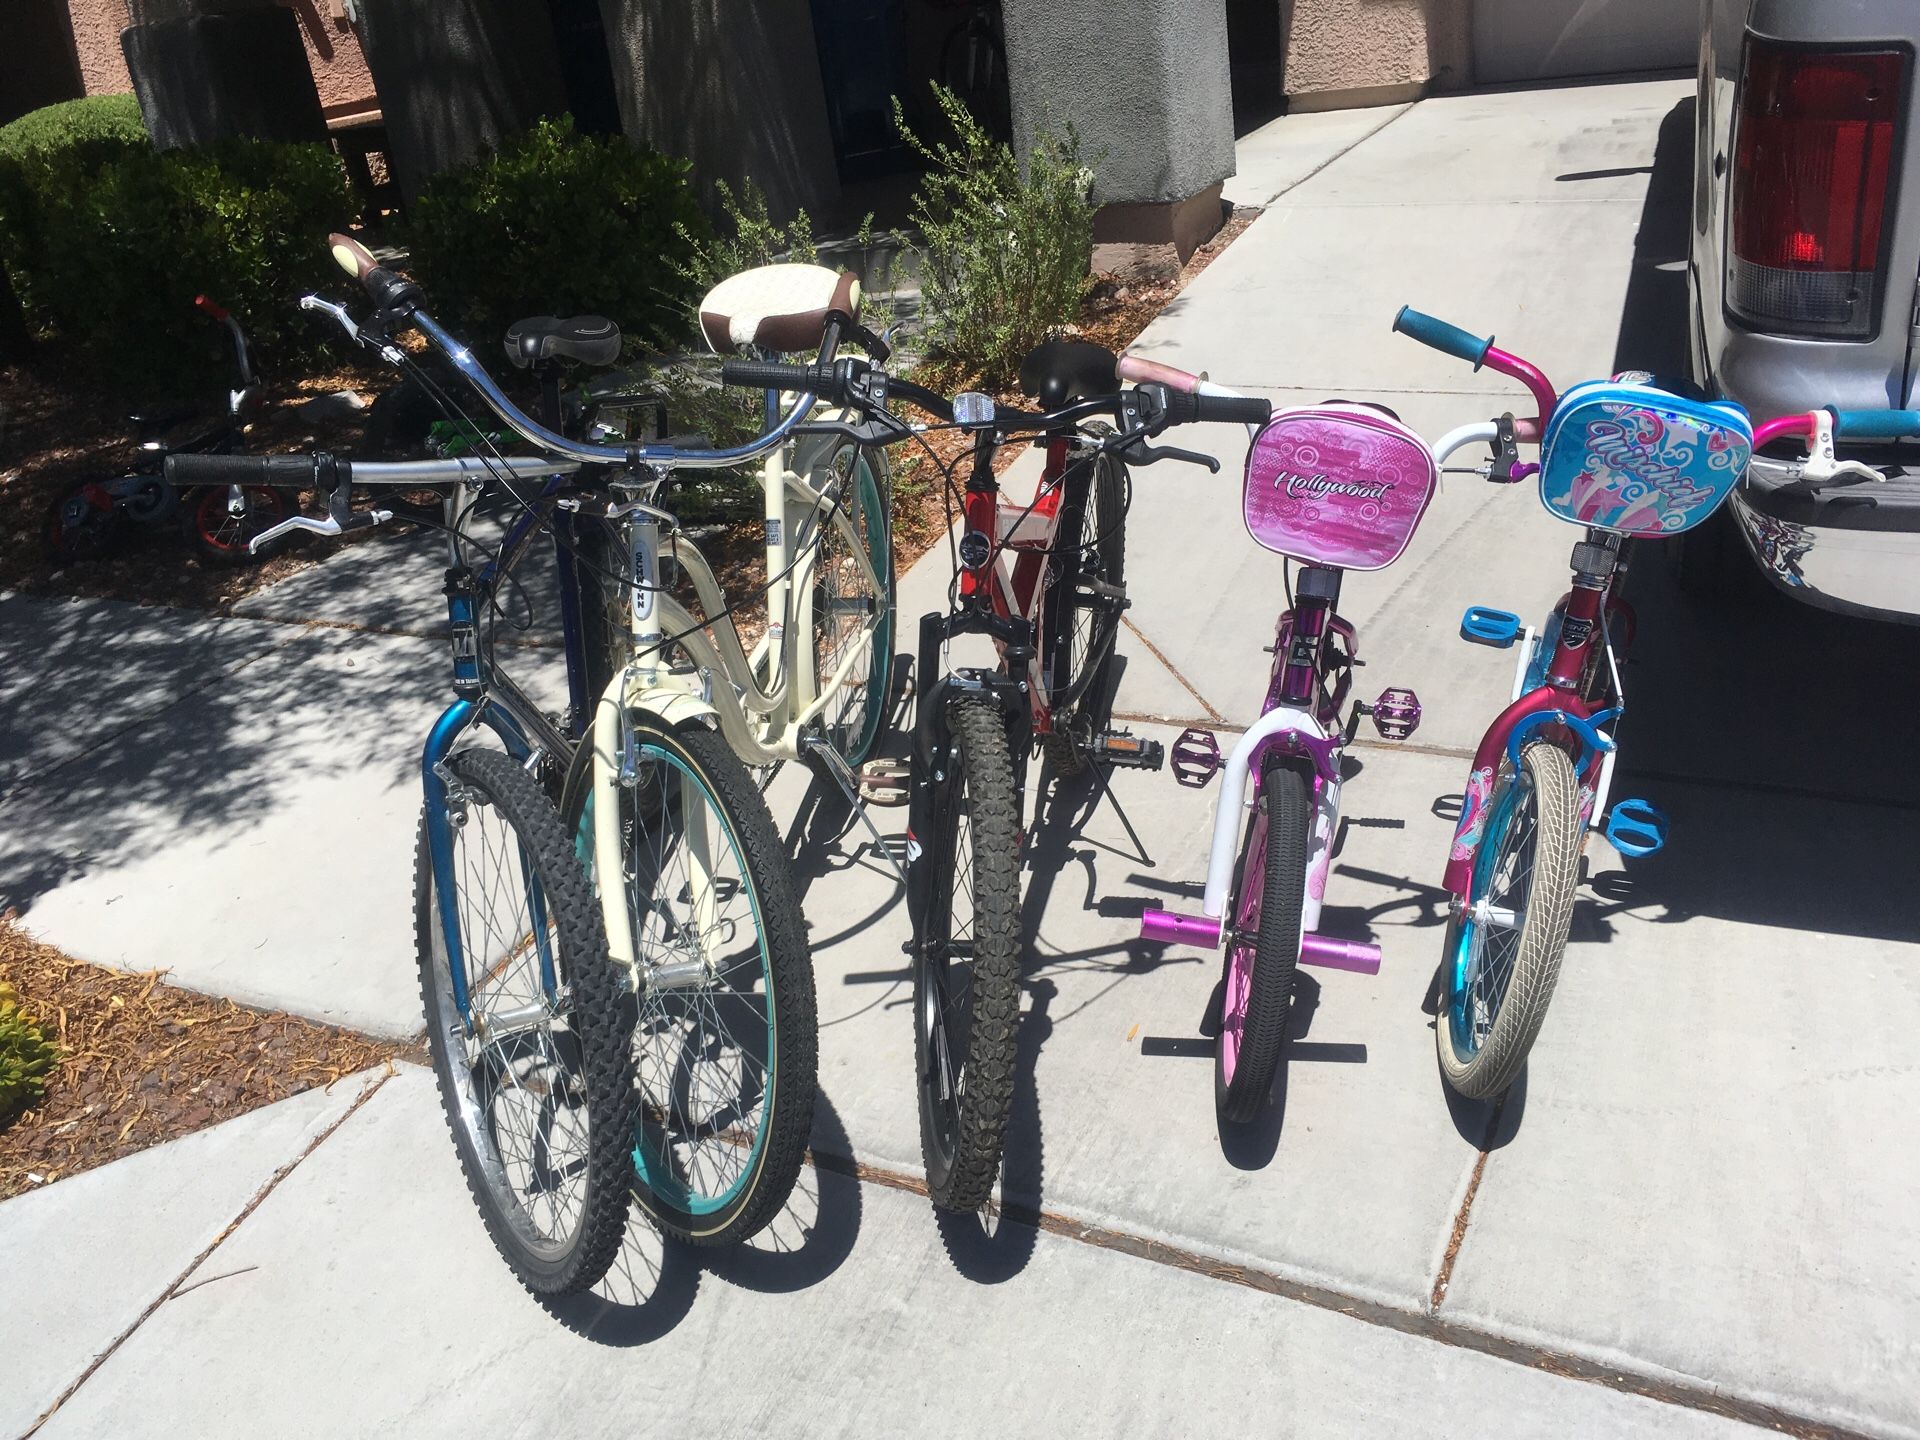 Bikes for the whole family